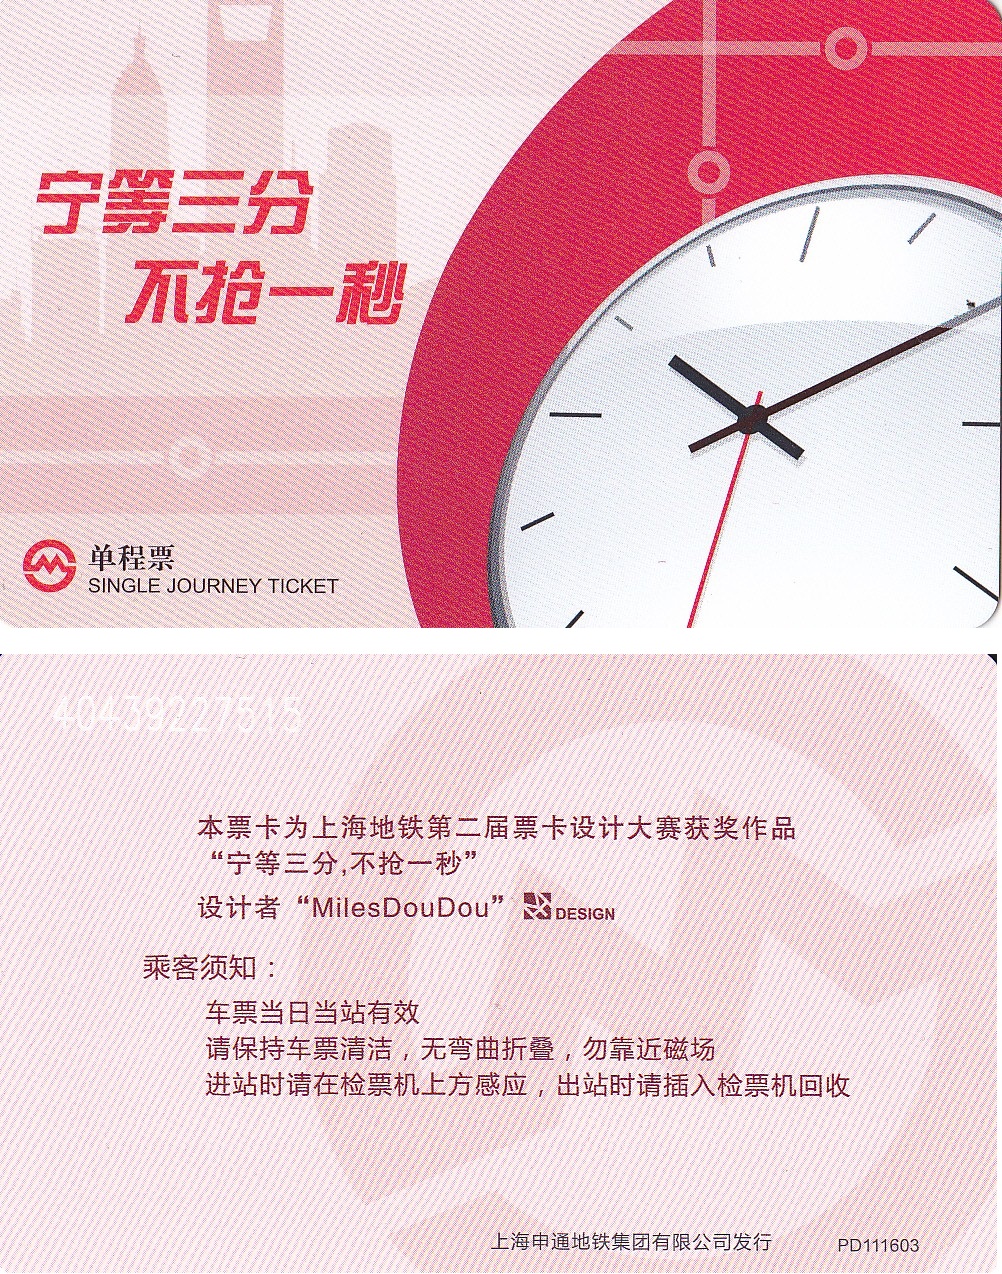 T5045, Shanghai Metro Card (Subway Ticket), Single Way, 2015 "Not Hurry for Safety"